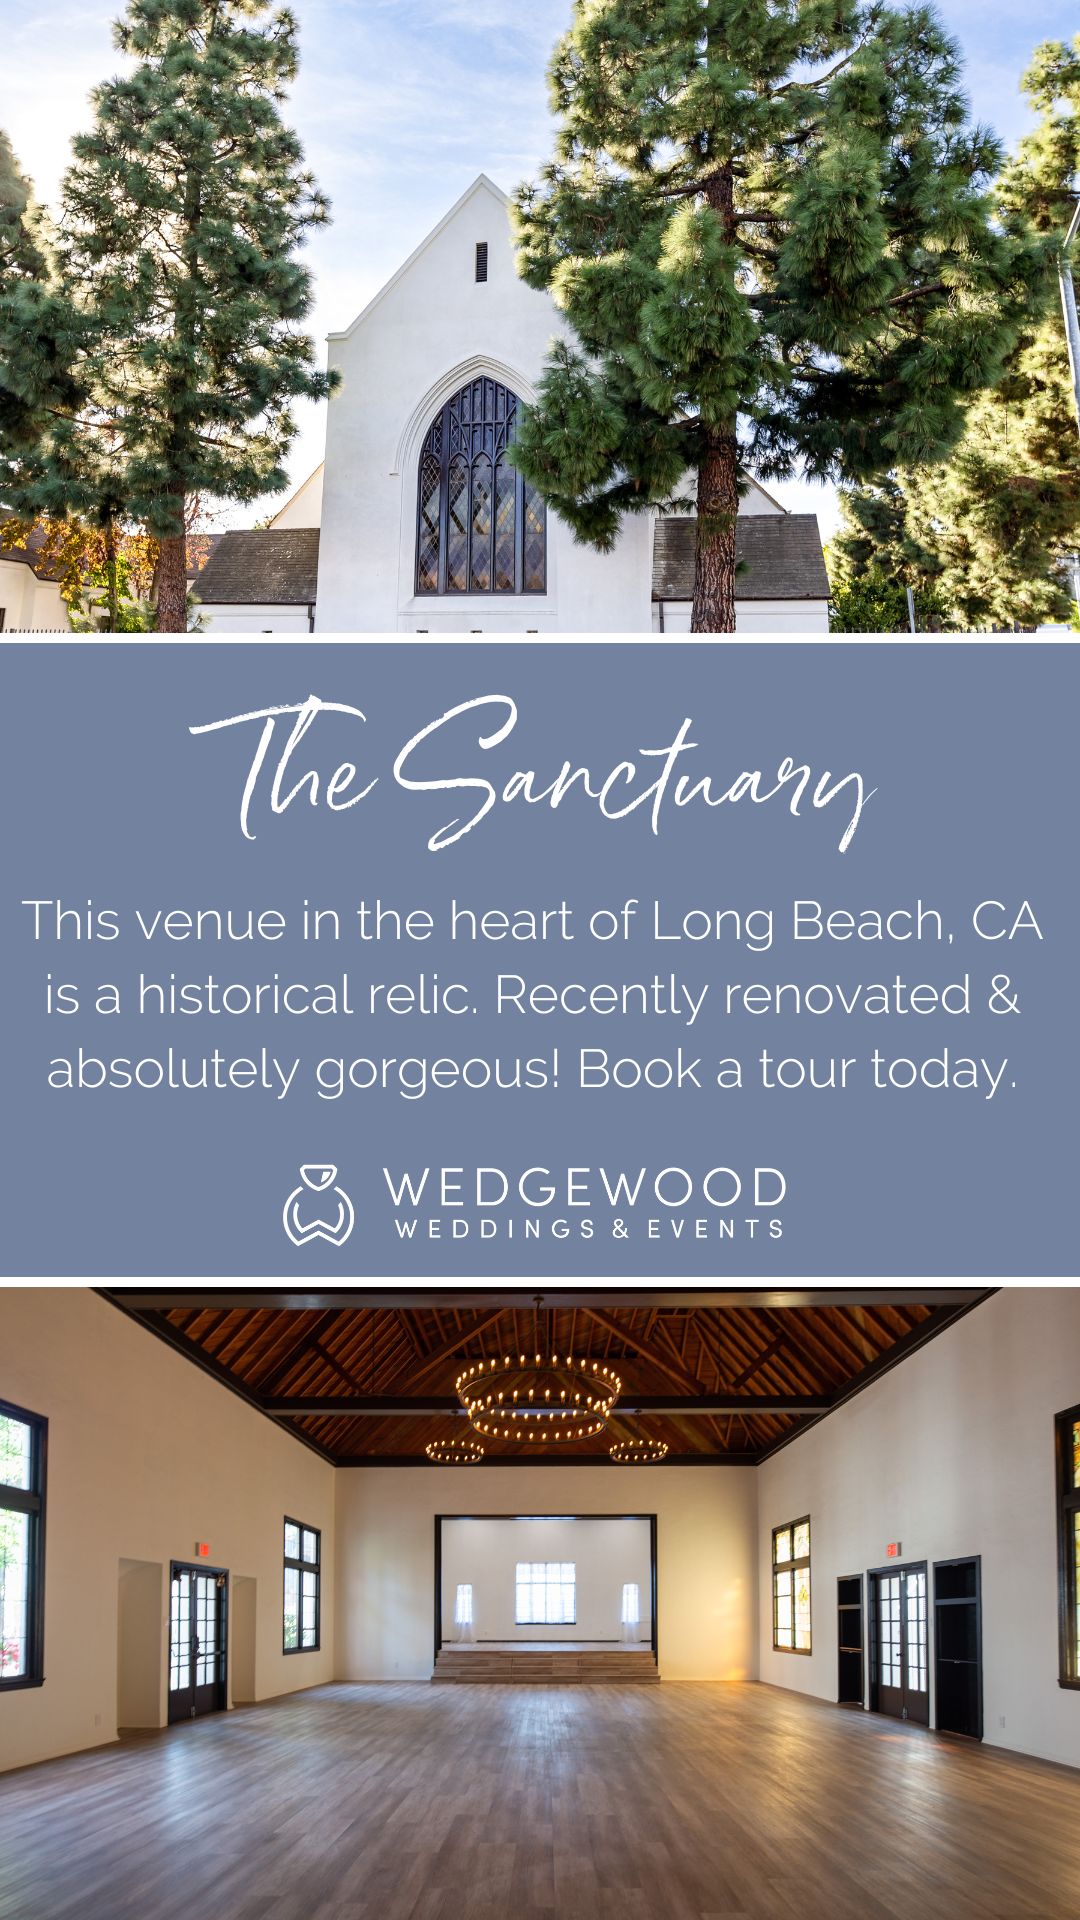 Long Beach is a favorite destination for activities, events, and also The Sanctuary by Wedgewood Weddings. Discover the hidden gem of Los Angeles County for yourself and see all that this historic property has to offer for events big and small. From the intimate courtyard to the expansive chapel and cozy grand hall, this stunning space is waiting to be explored!